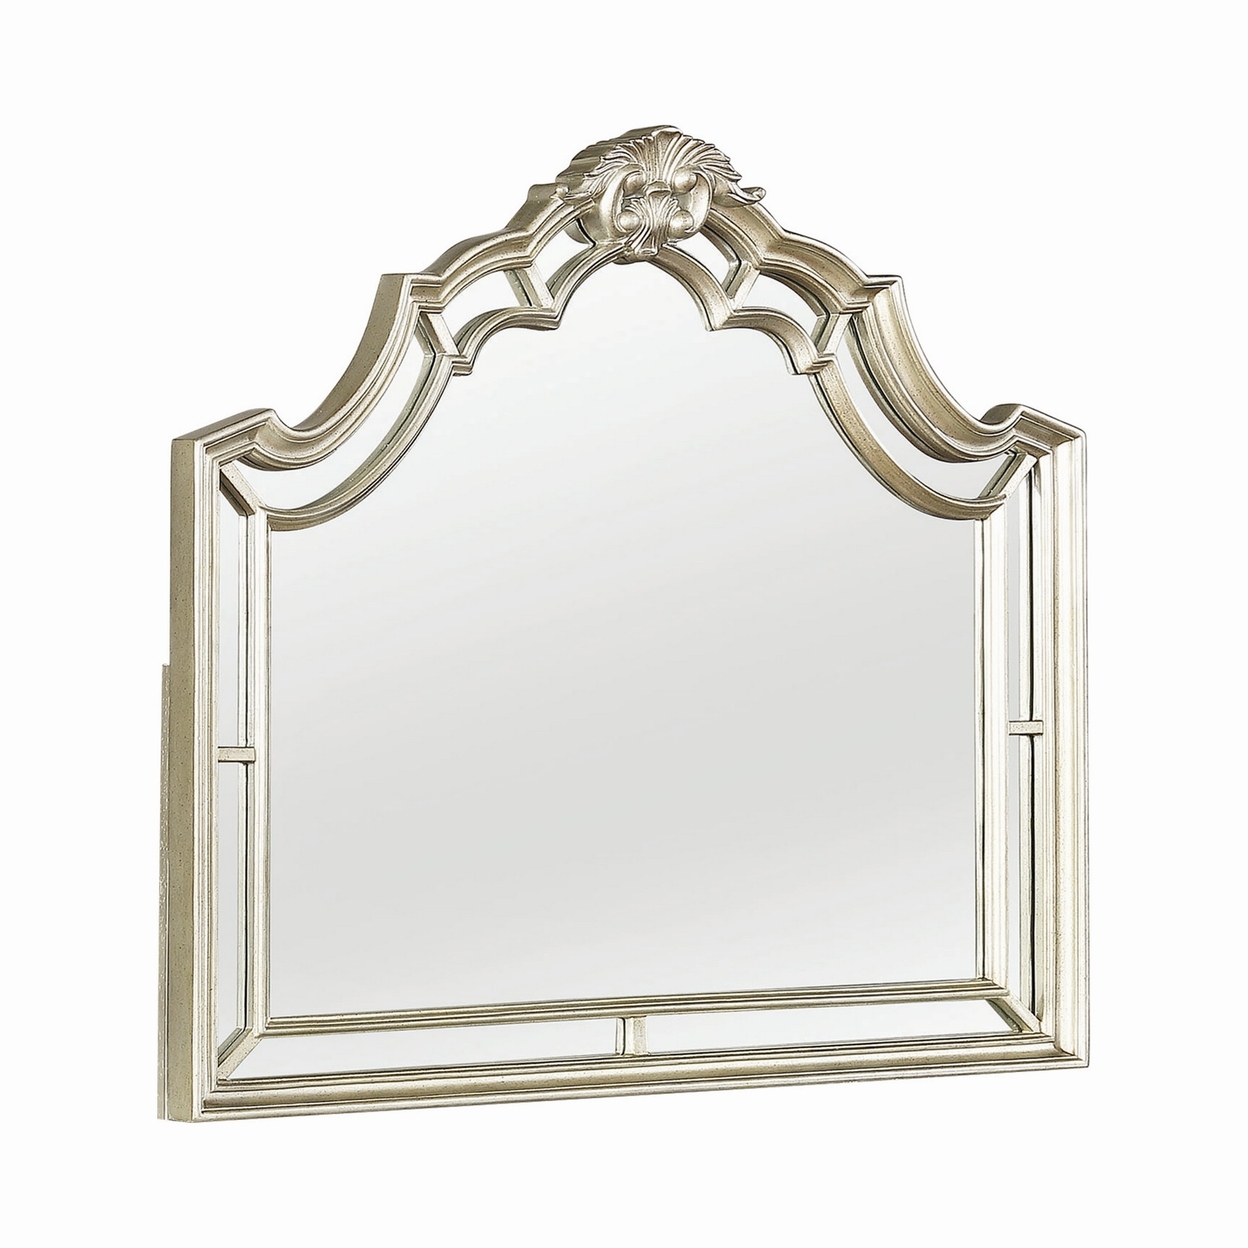 Traditional Molded Wooden Frame Mirror With Crown Top, Silver- Saltoro Sherpi